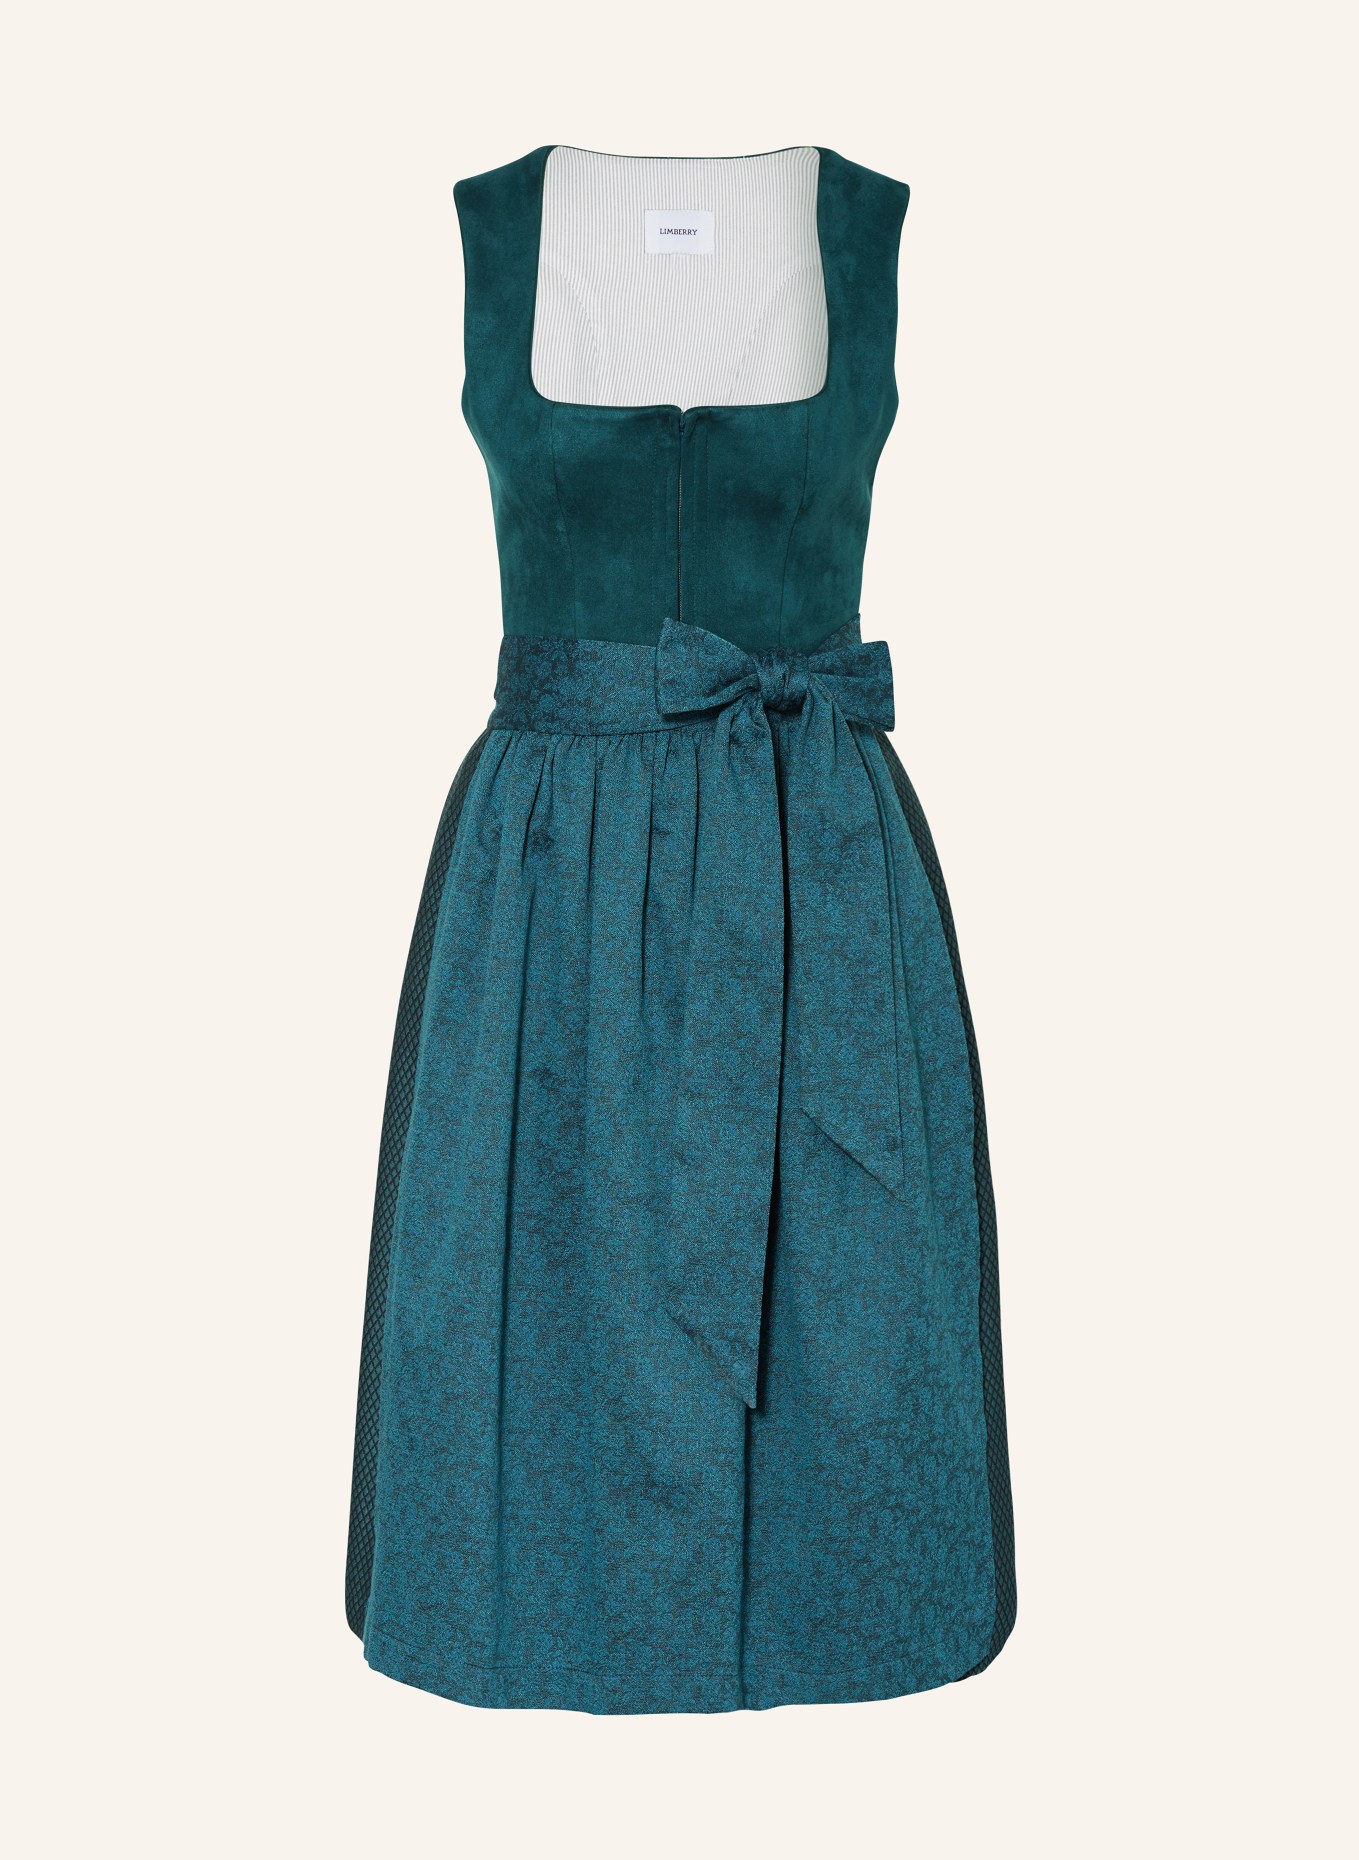 LIMBERRY Dirndl, Color: TEAL/ TURQUOISE/ DARK GRAY (Image 1)